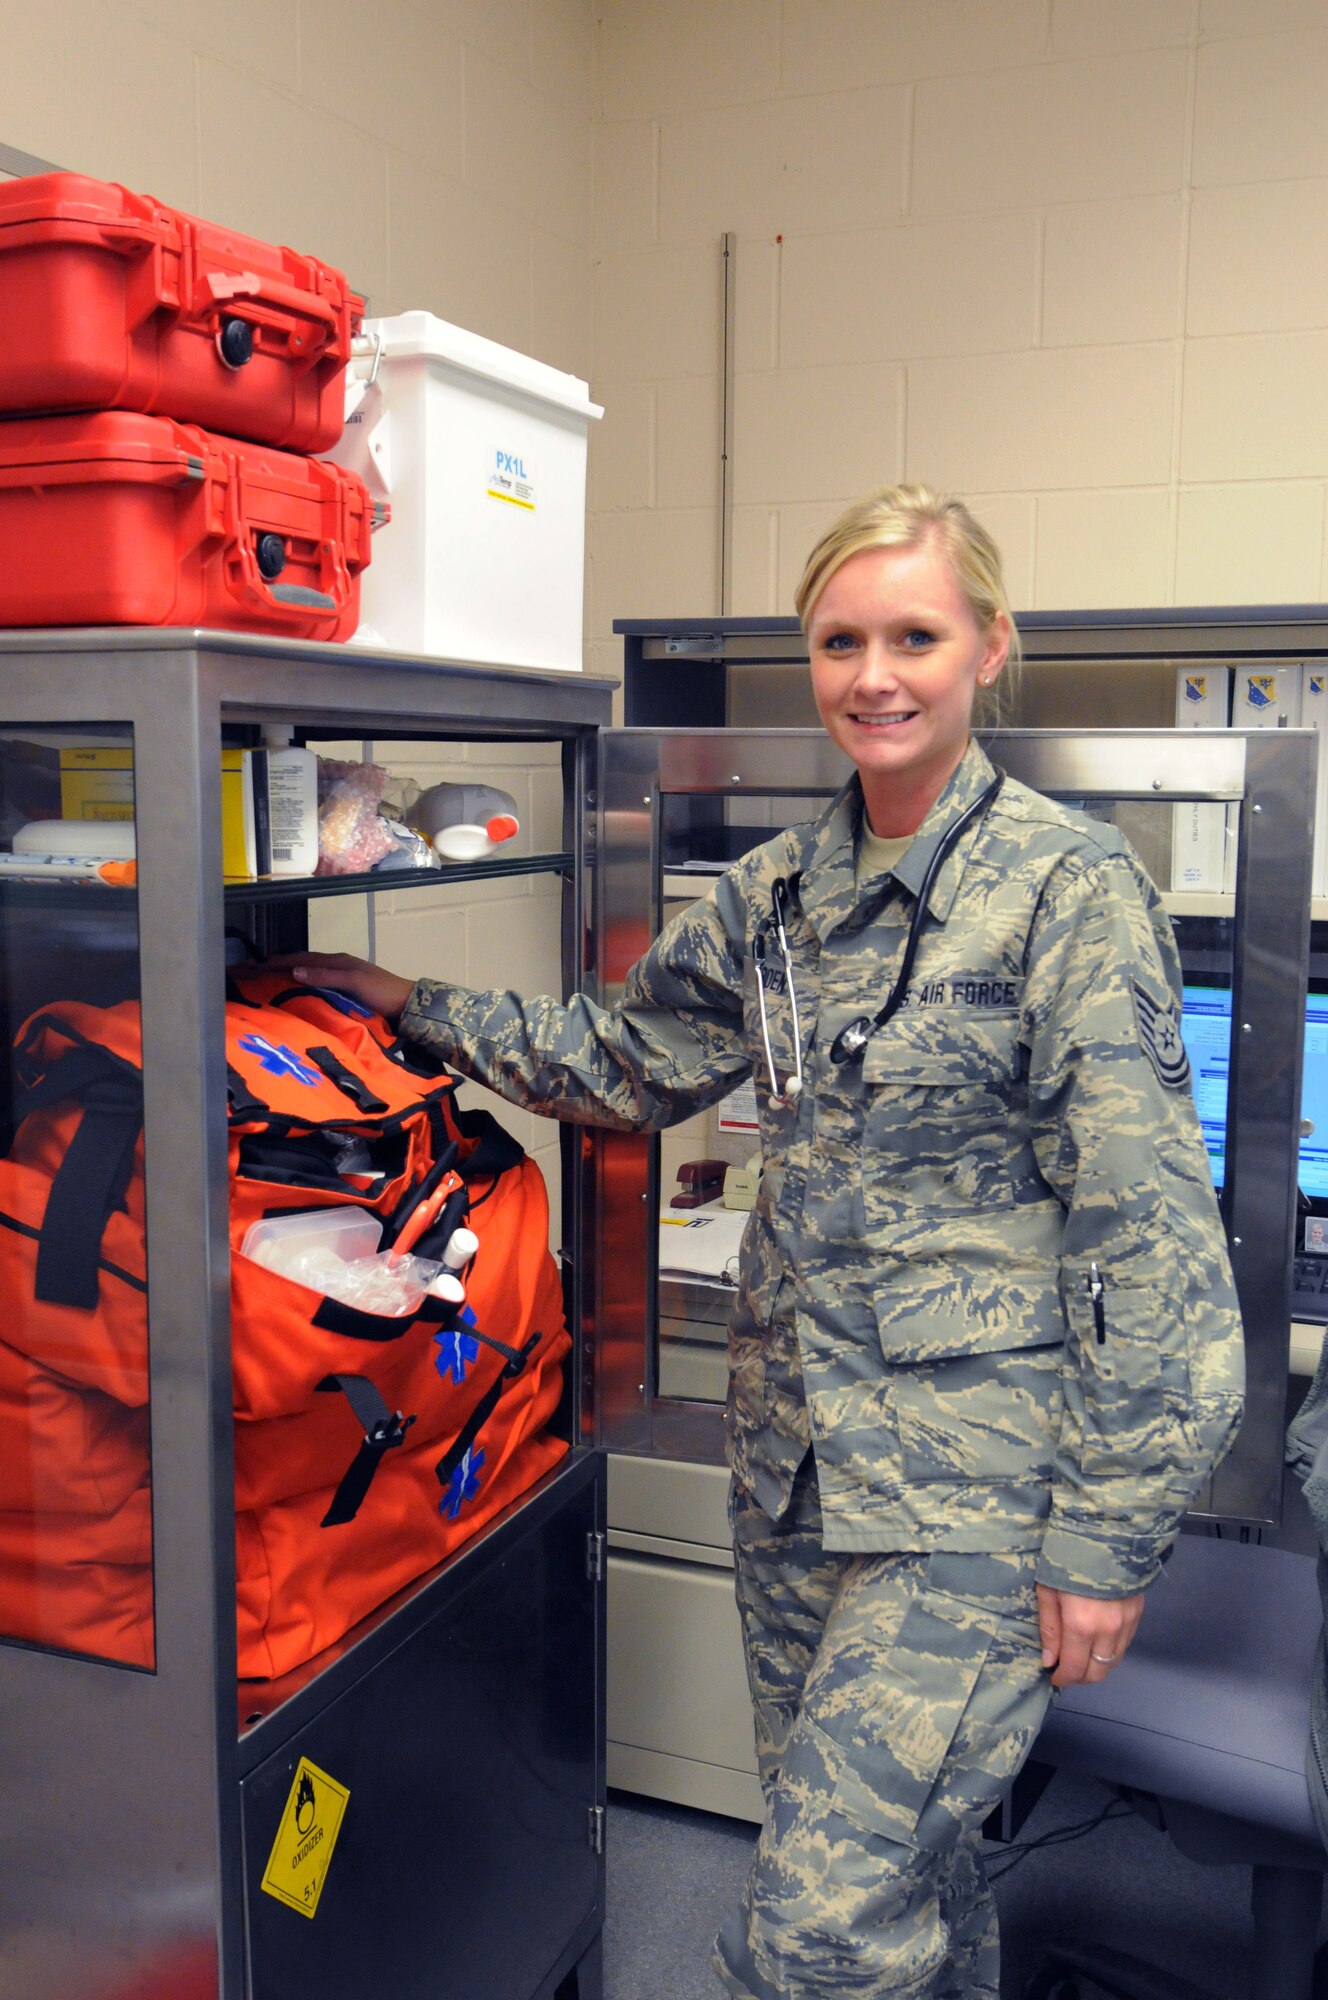 Tech. Sgt. Amanda Roen, 148th Fighter Wing, Duluth, Minn. poses for a photo, Nov. 15, 2015.  Roen is currently a registered nurse with Essentia Health and plans to attend further schooling to become a nurse practitioner.  (U.S. Air National Guard photo by Tech. Sgt. Amie Muller)